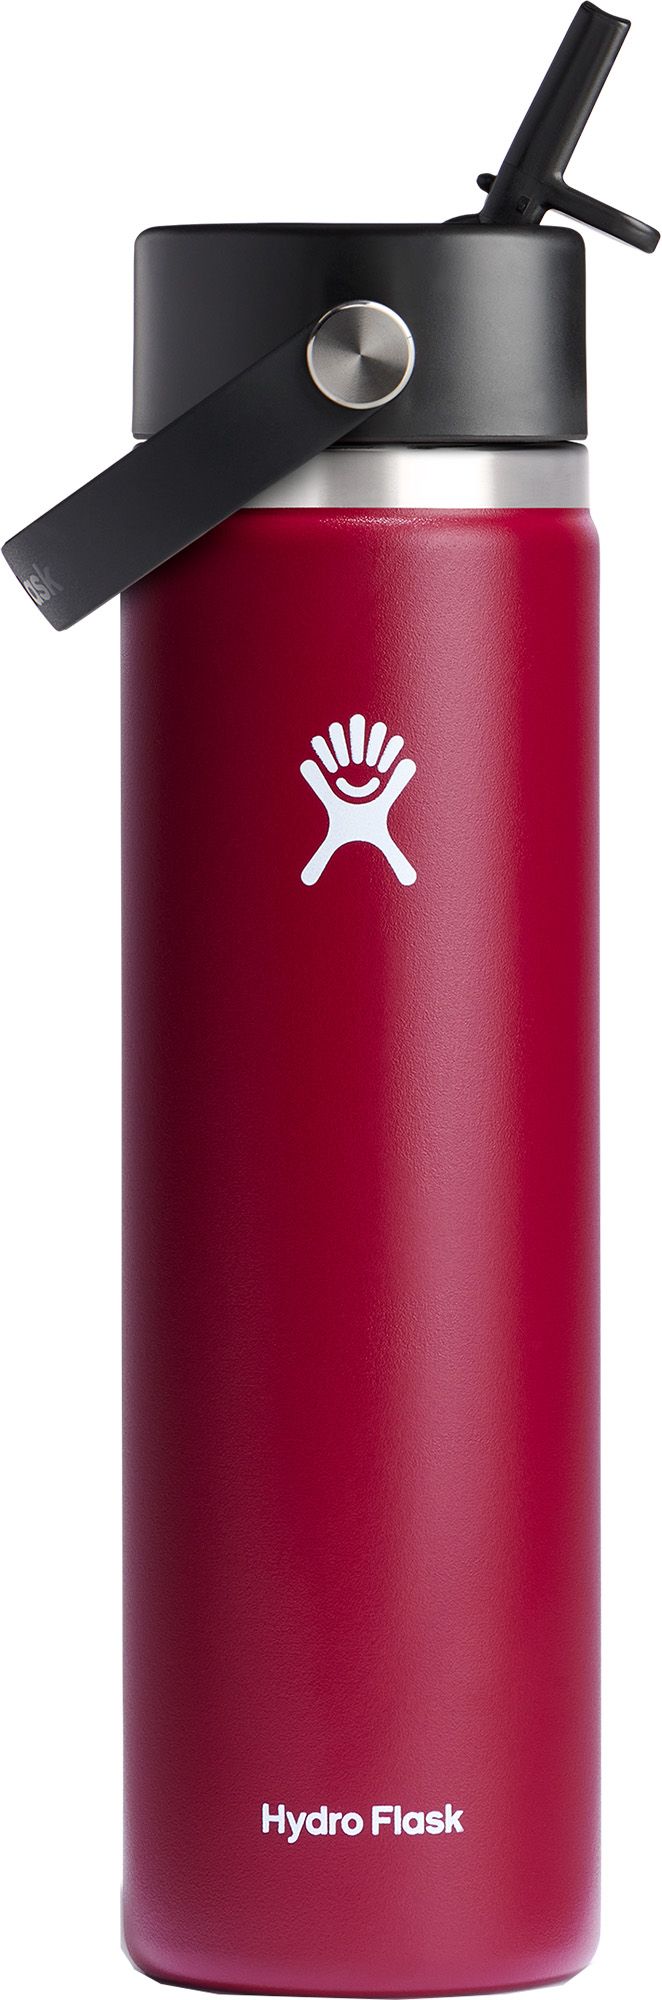 Hydro Flask oz. Wide Mouth Bottle with Flex Straw Cap